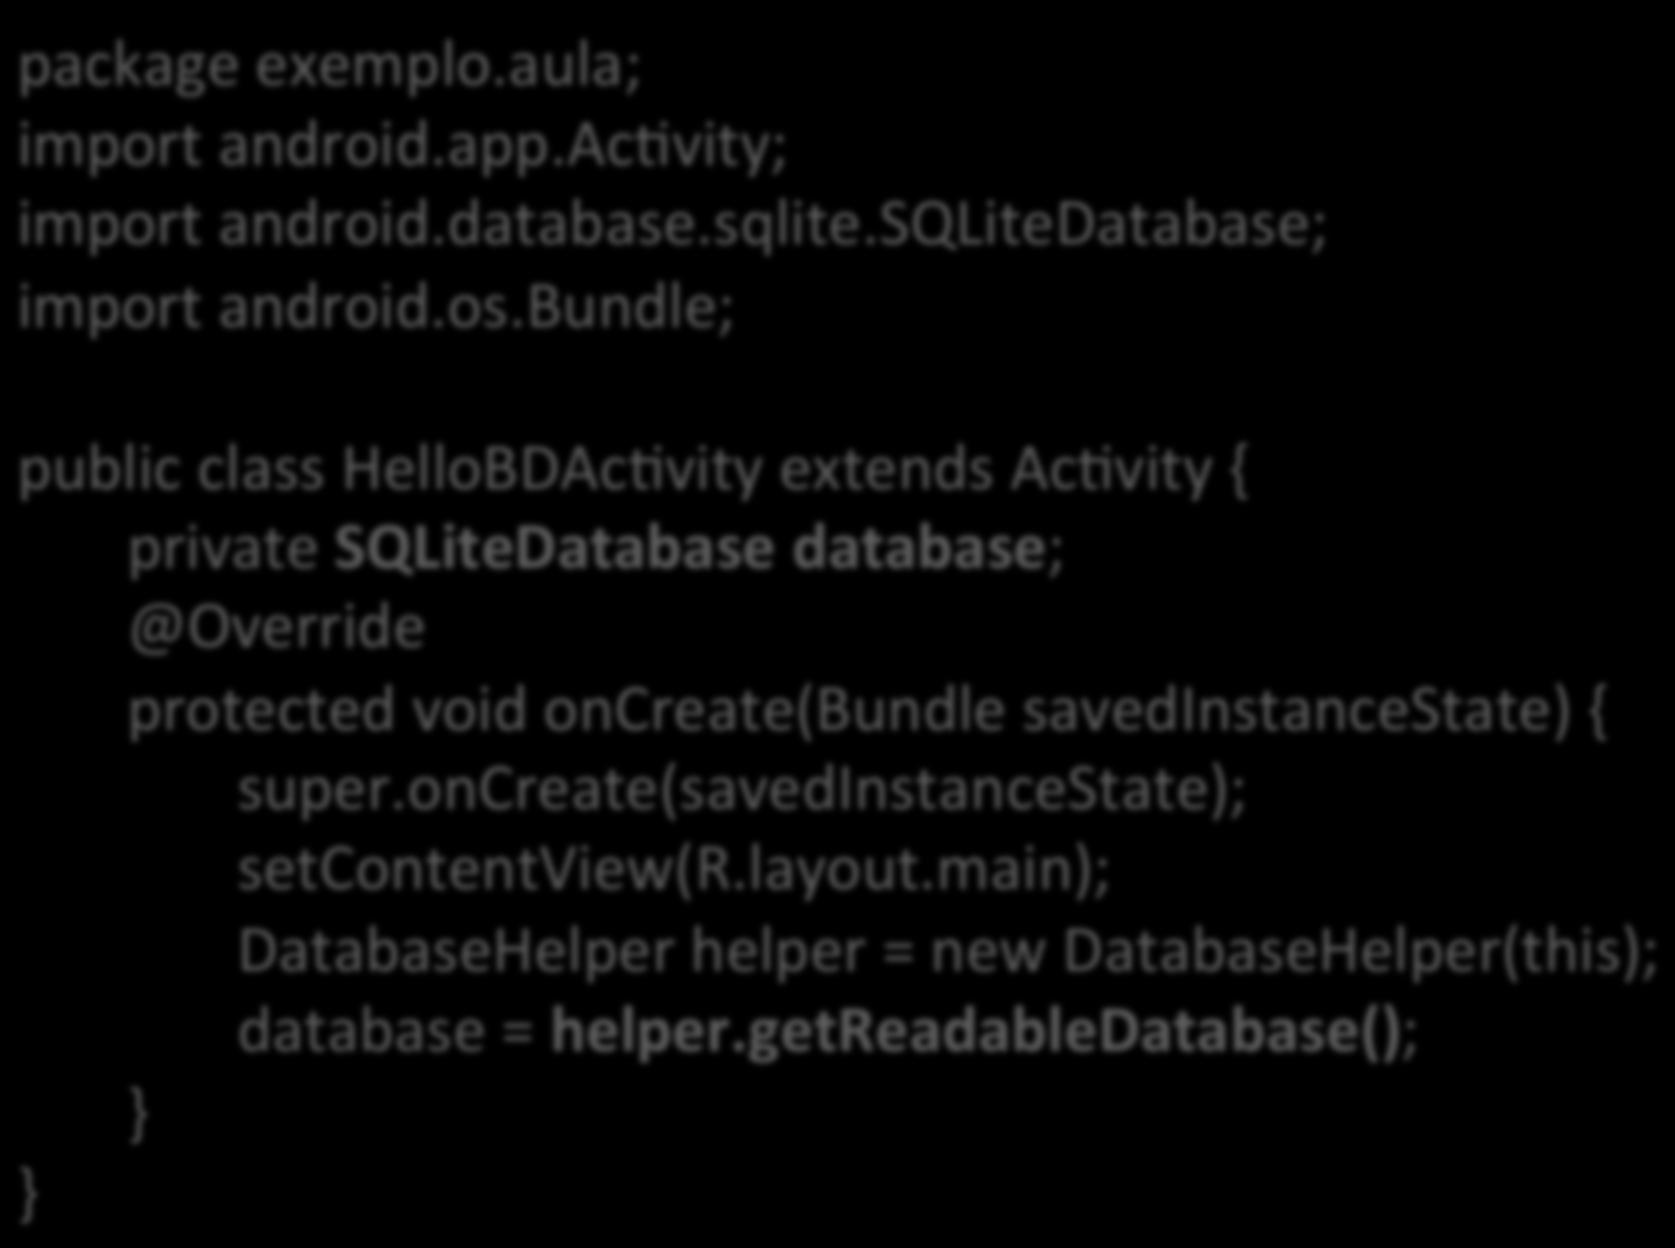 Acessando o Banco de Dados package exemplo.aula; import android.app.acavity; import android.database.sqlite.sqlitedatabase; import android.os.bundle; public class HelloBDAcAvity extends AcAvity { private SQLiteDatabase database; @Override protected void oncreate(bundle savedinstancestate) { super.